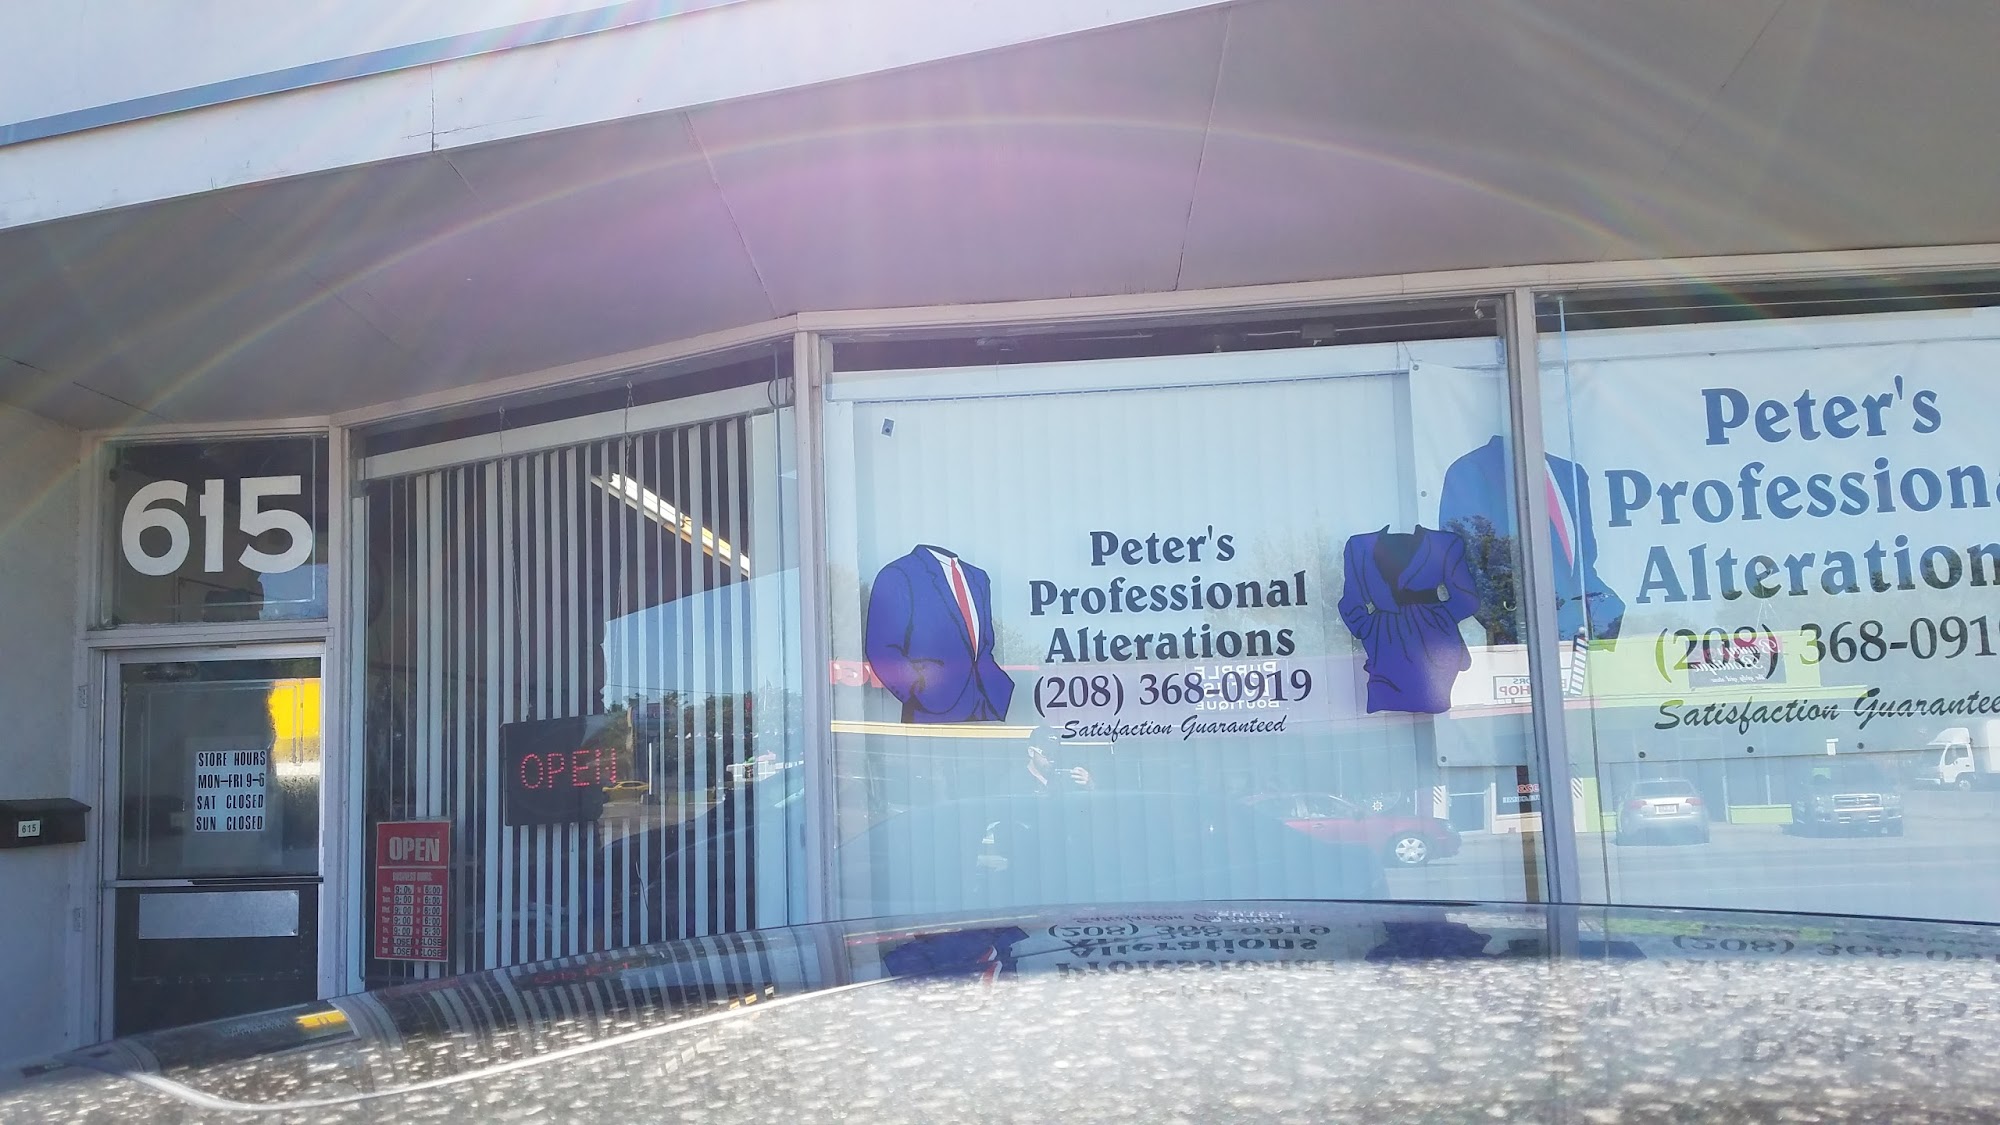 Peter's Professional Alterations